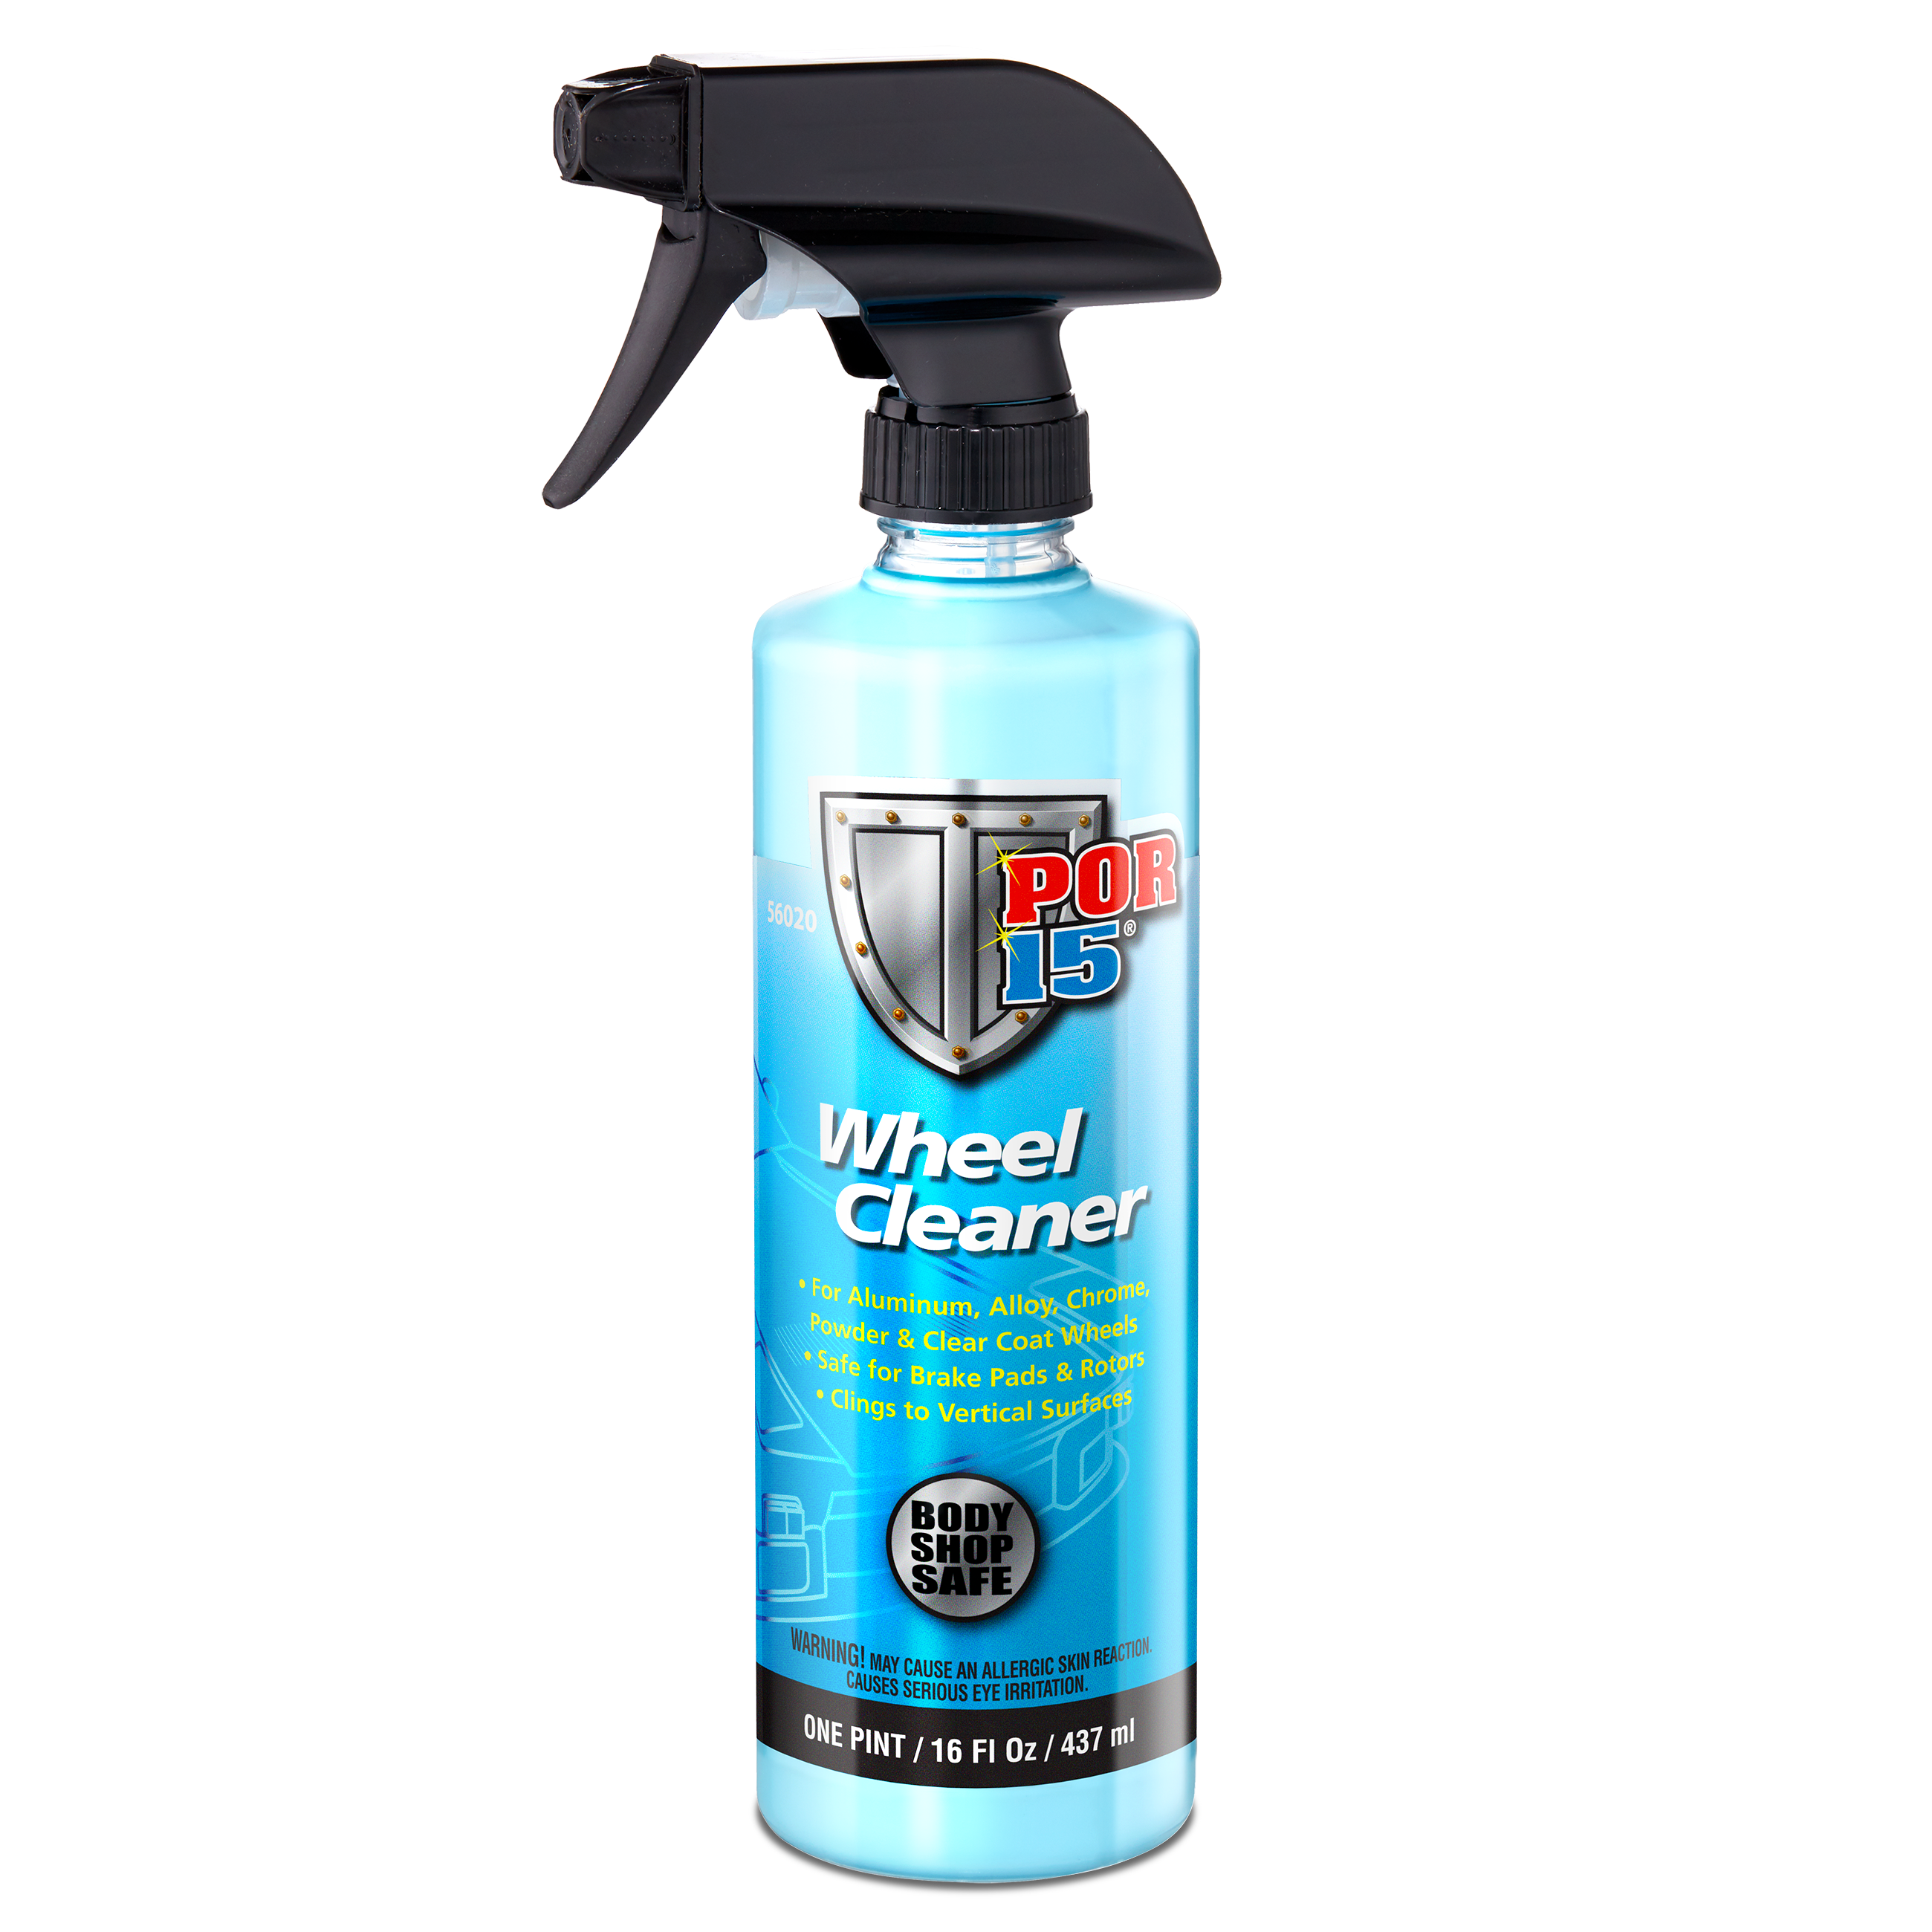 Wheel Cleaner+ - Color Changing Brake Dust Remover